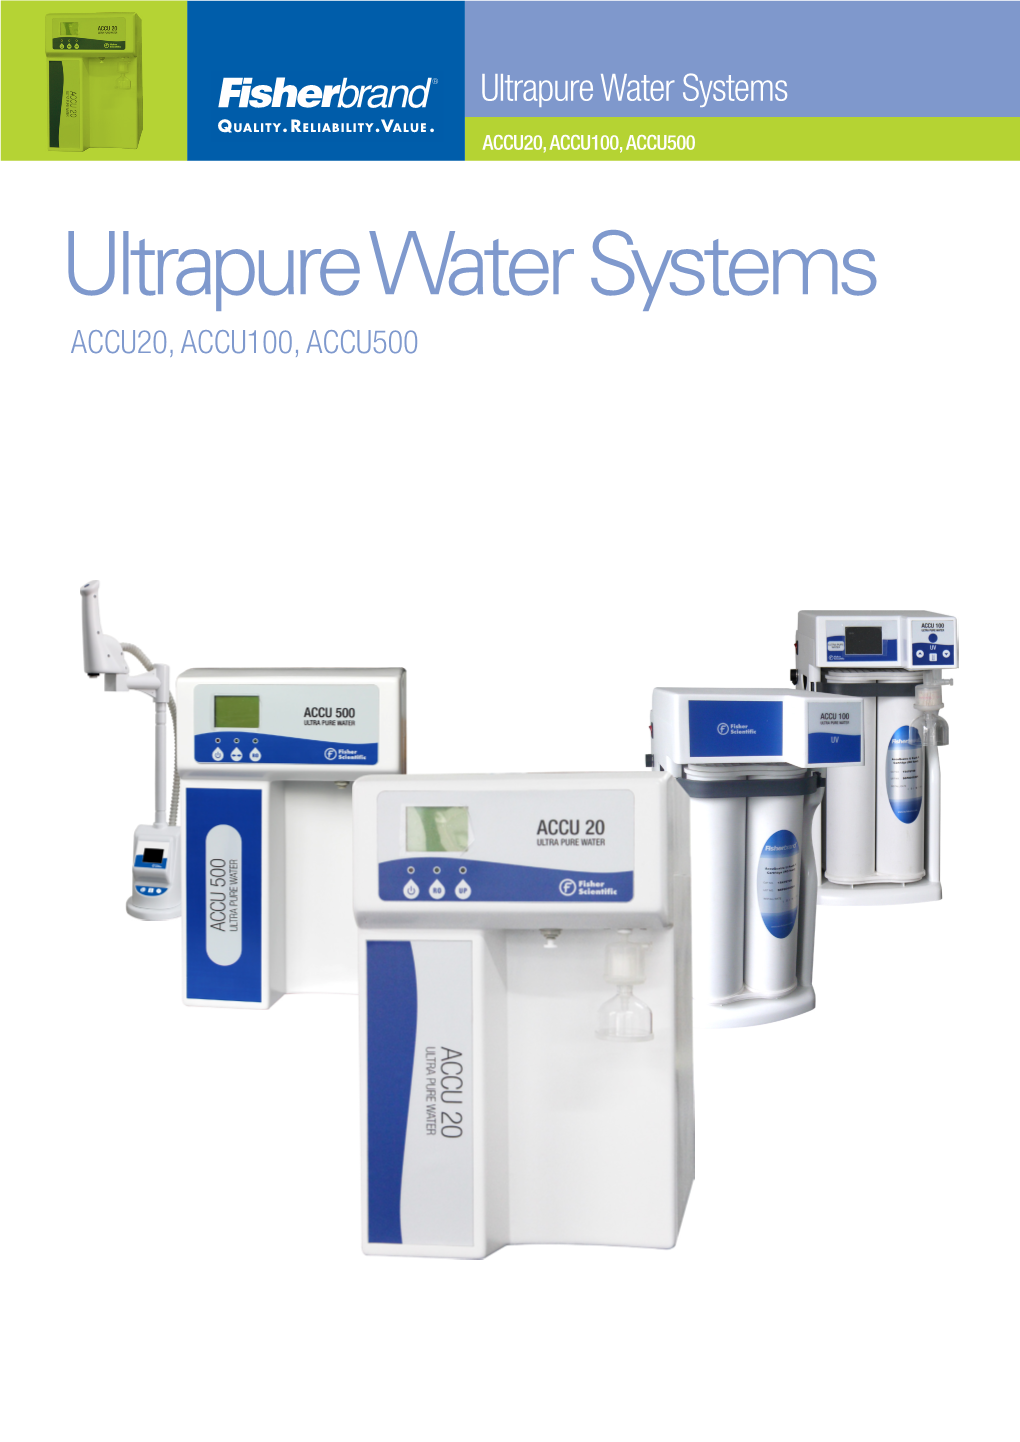 Ultrapure Water Systems